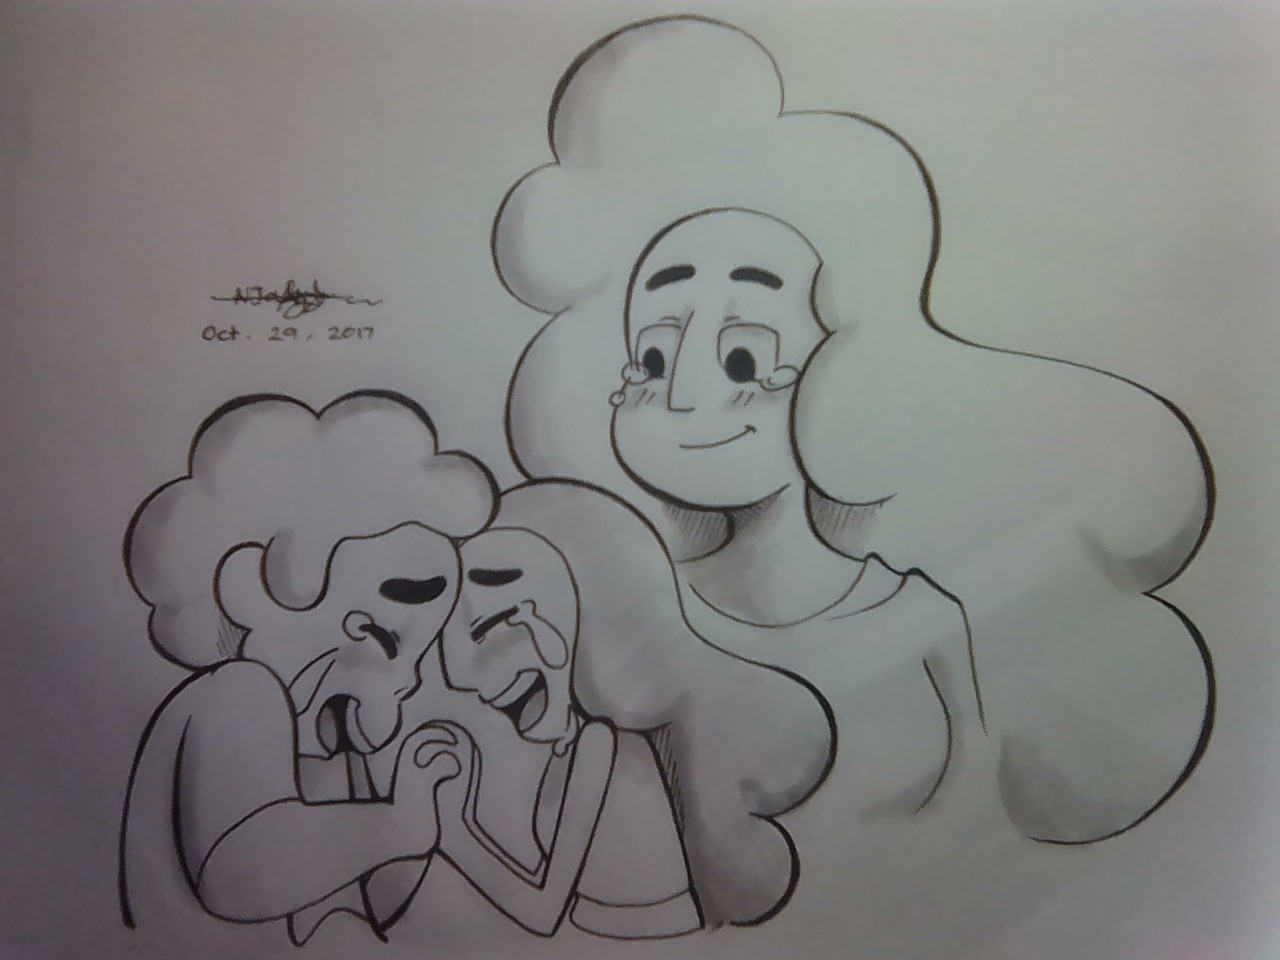 Inktober 29: United I’m really thankful that Steven got home safely and now that Connie is happy to see him. Hope they get back soon to save Lars and the other gems.